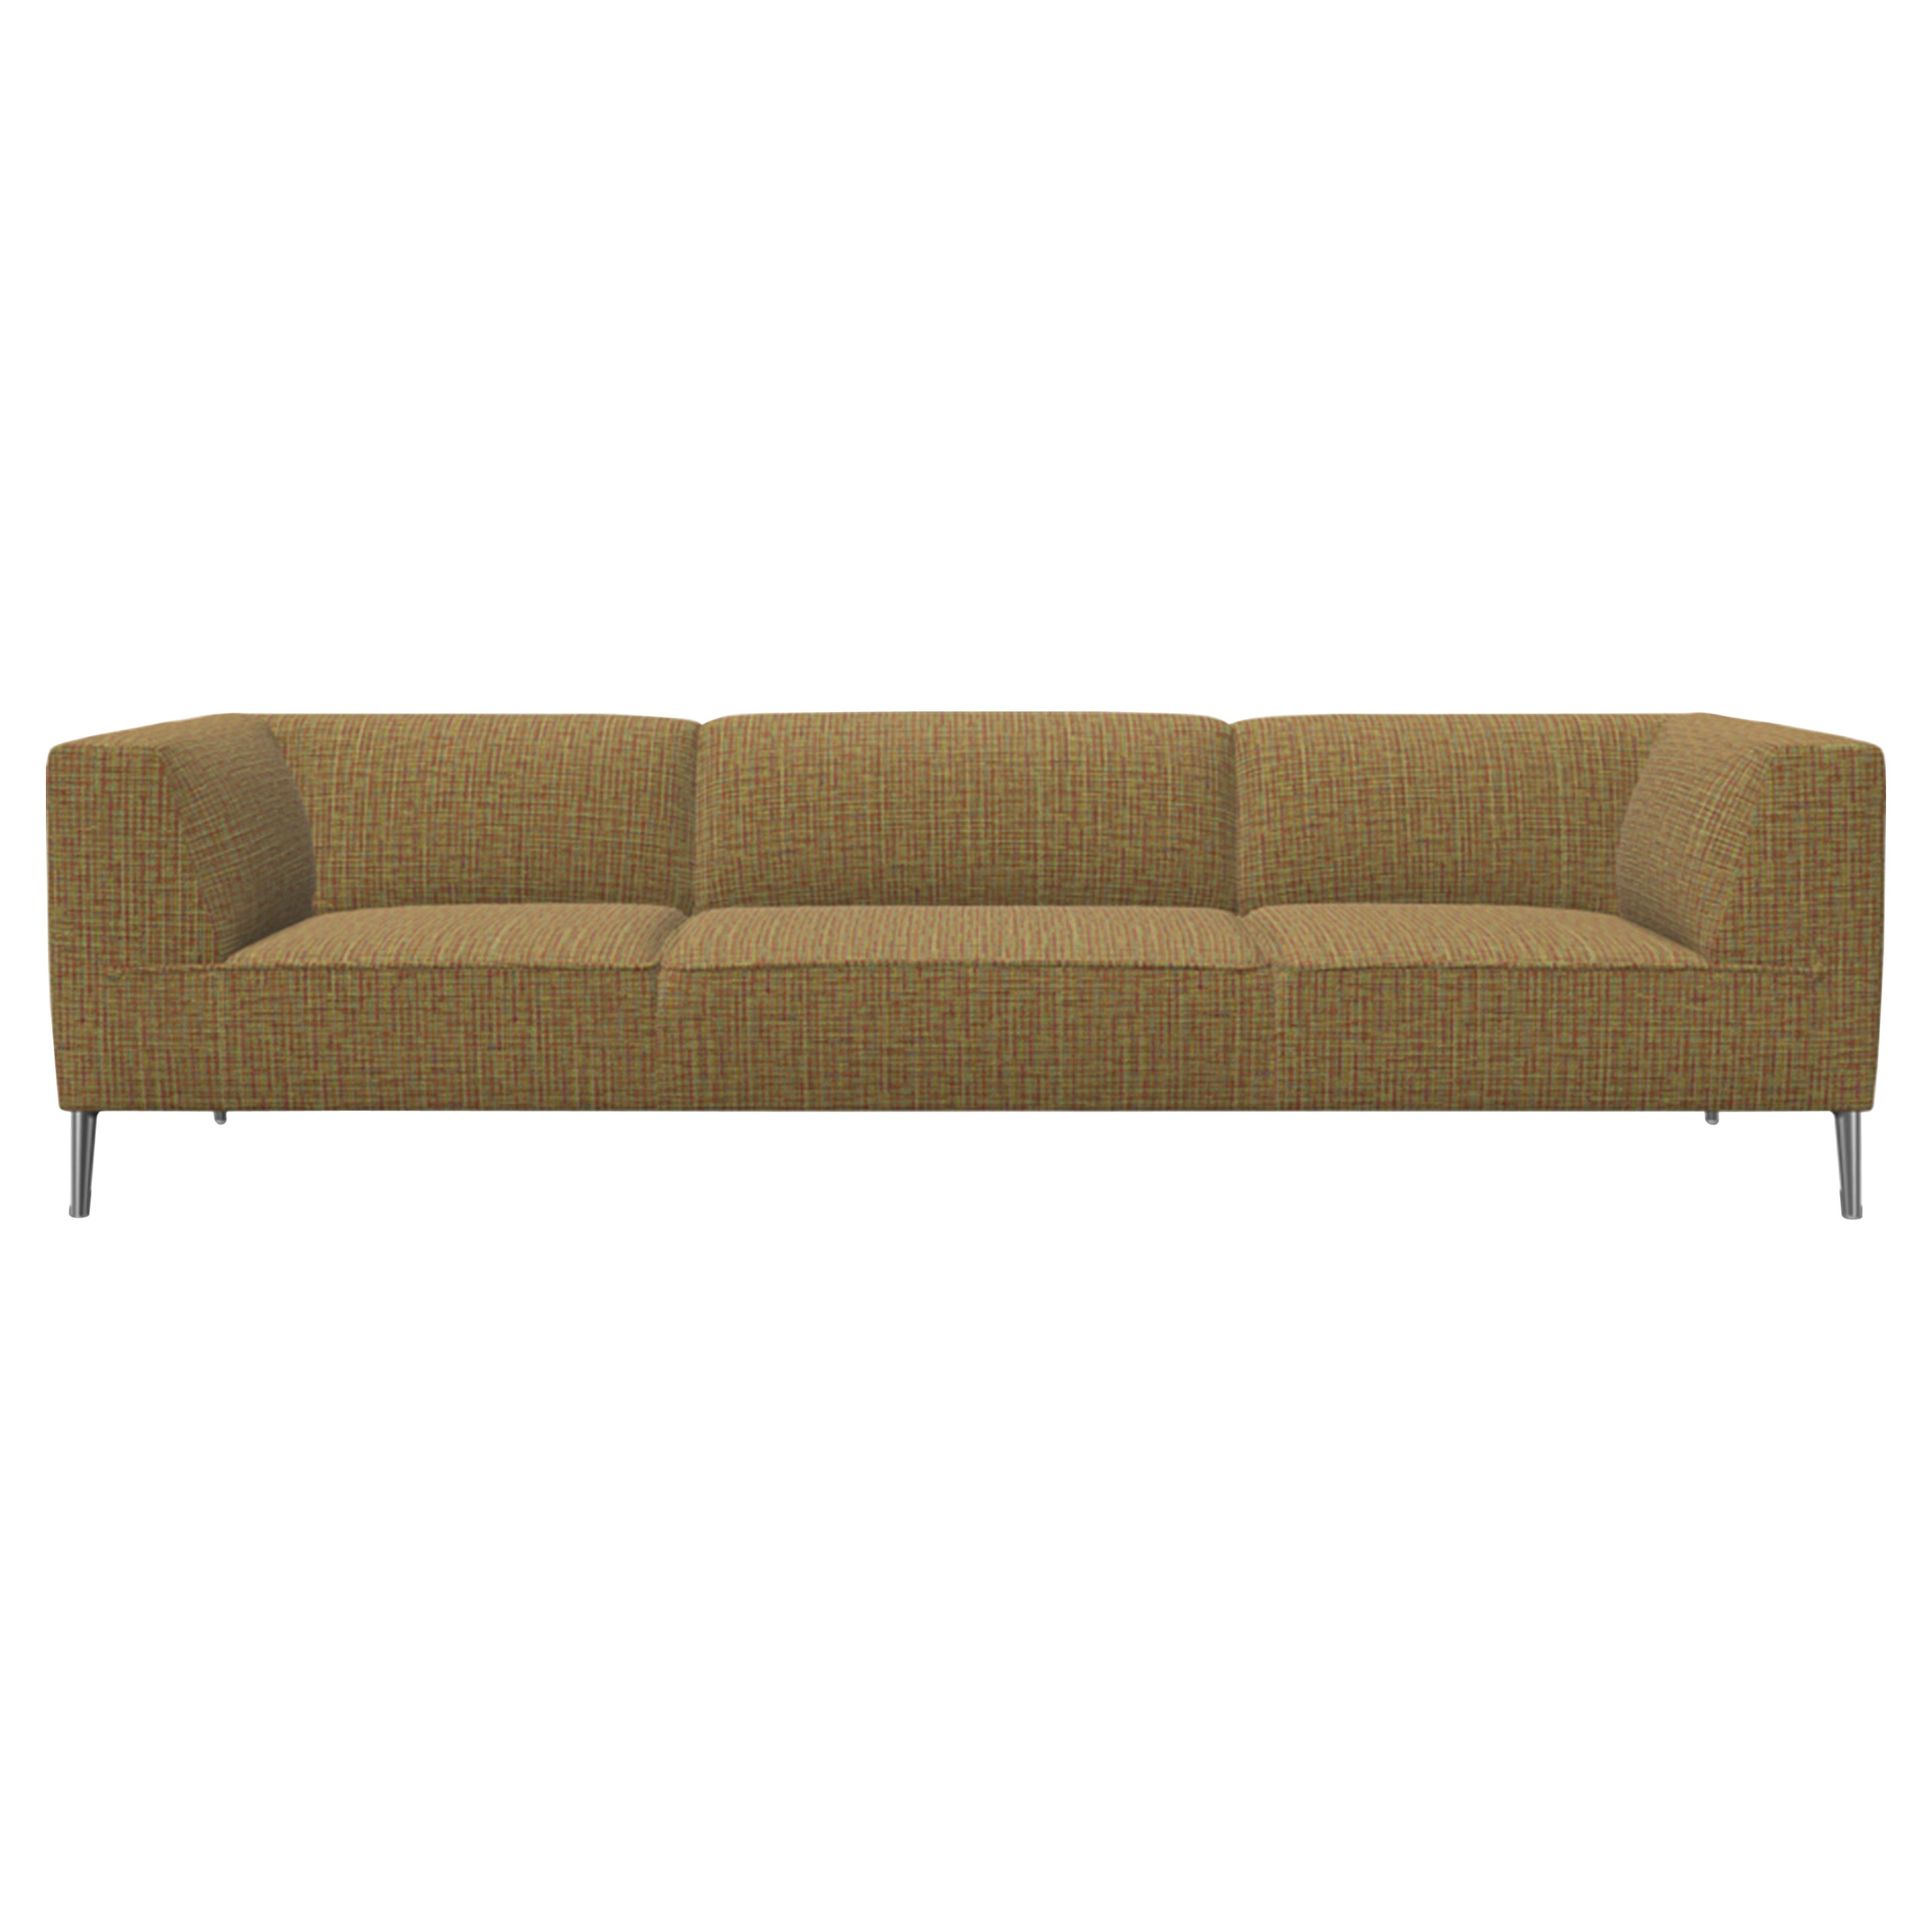 Moooi Triple Seat Sofa So Good in Rainbow Upholstery with Polished Aluminum Feet For Sale